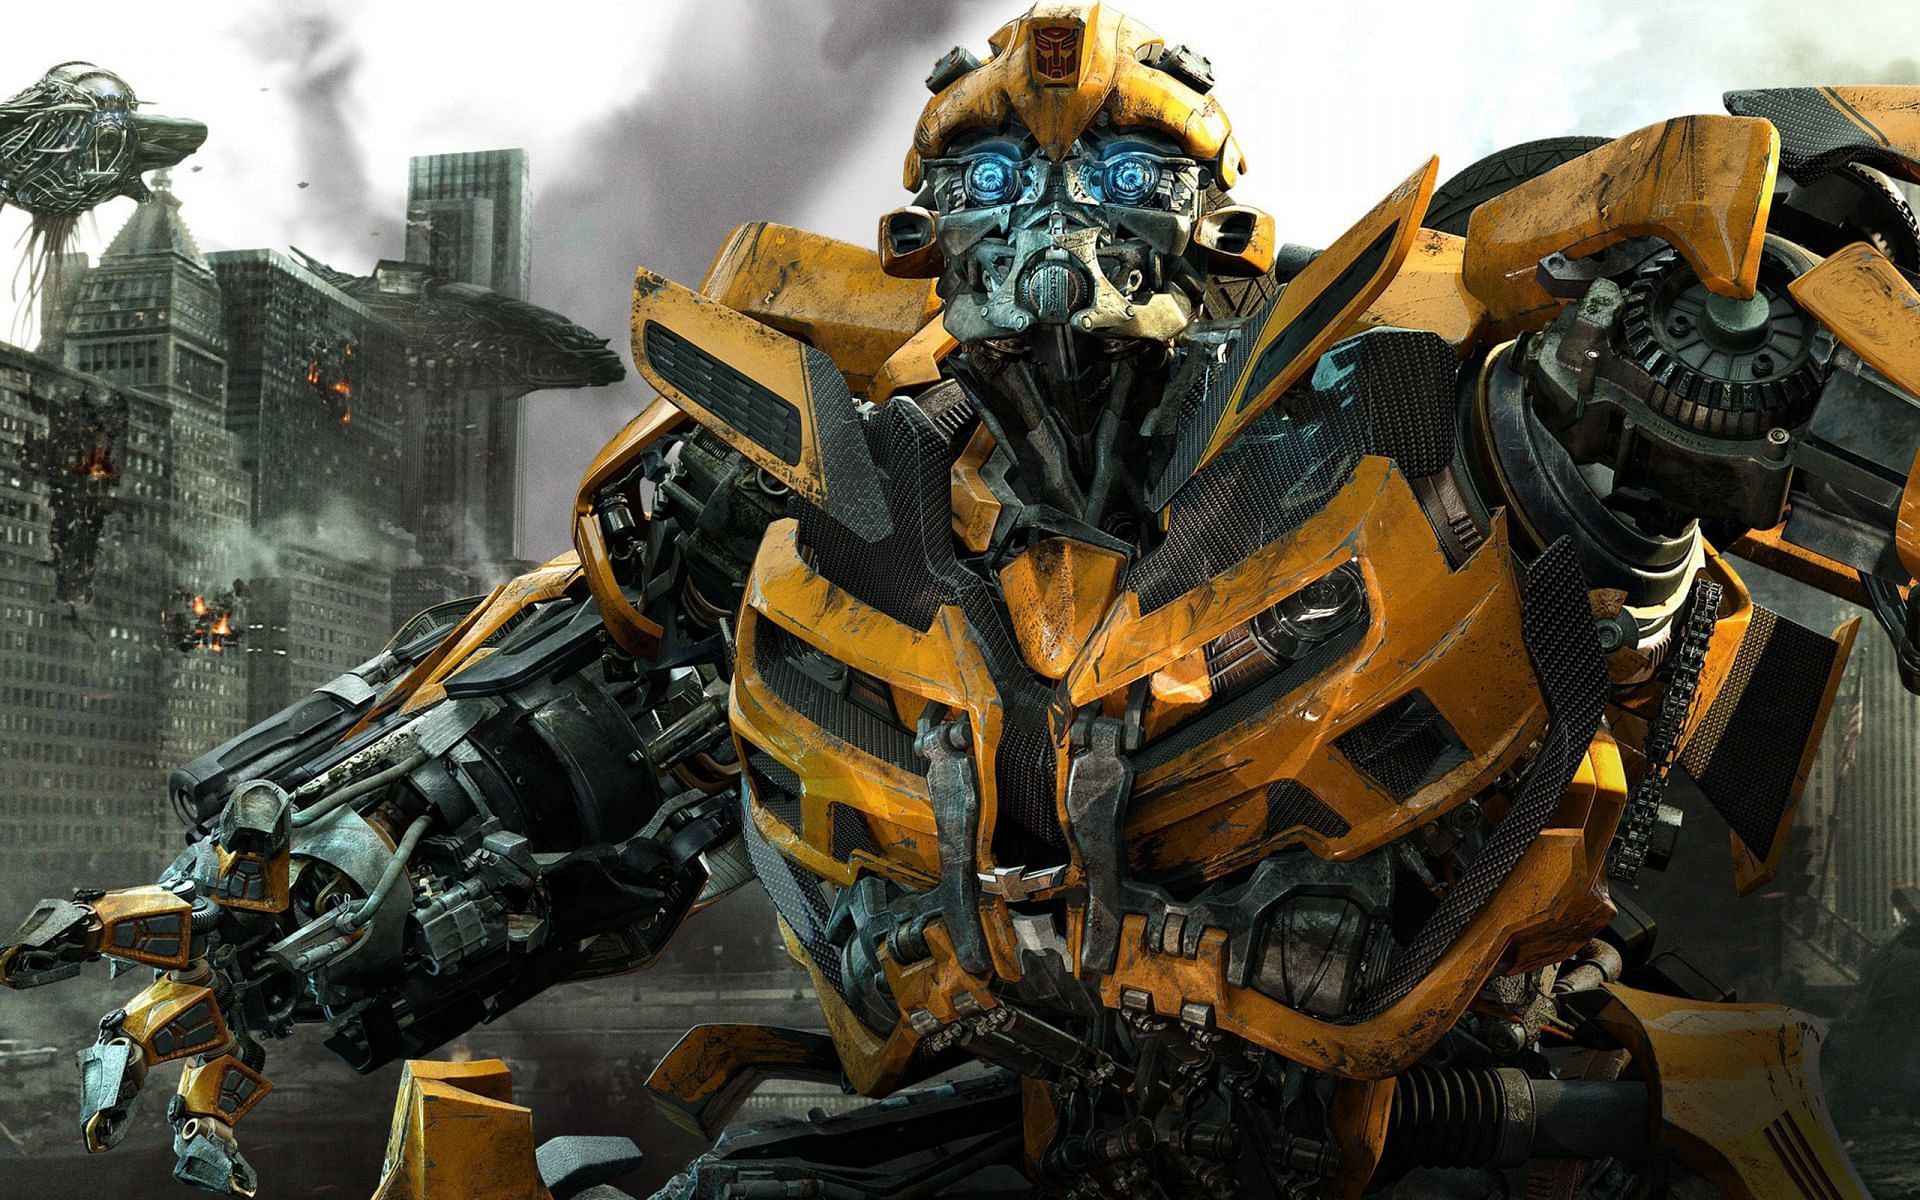 From vocal chords to radio waves: The transformation of Bumblebee